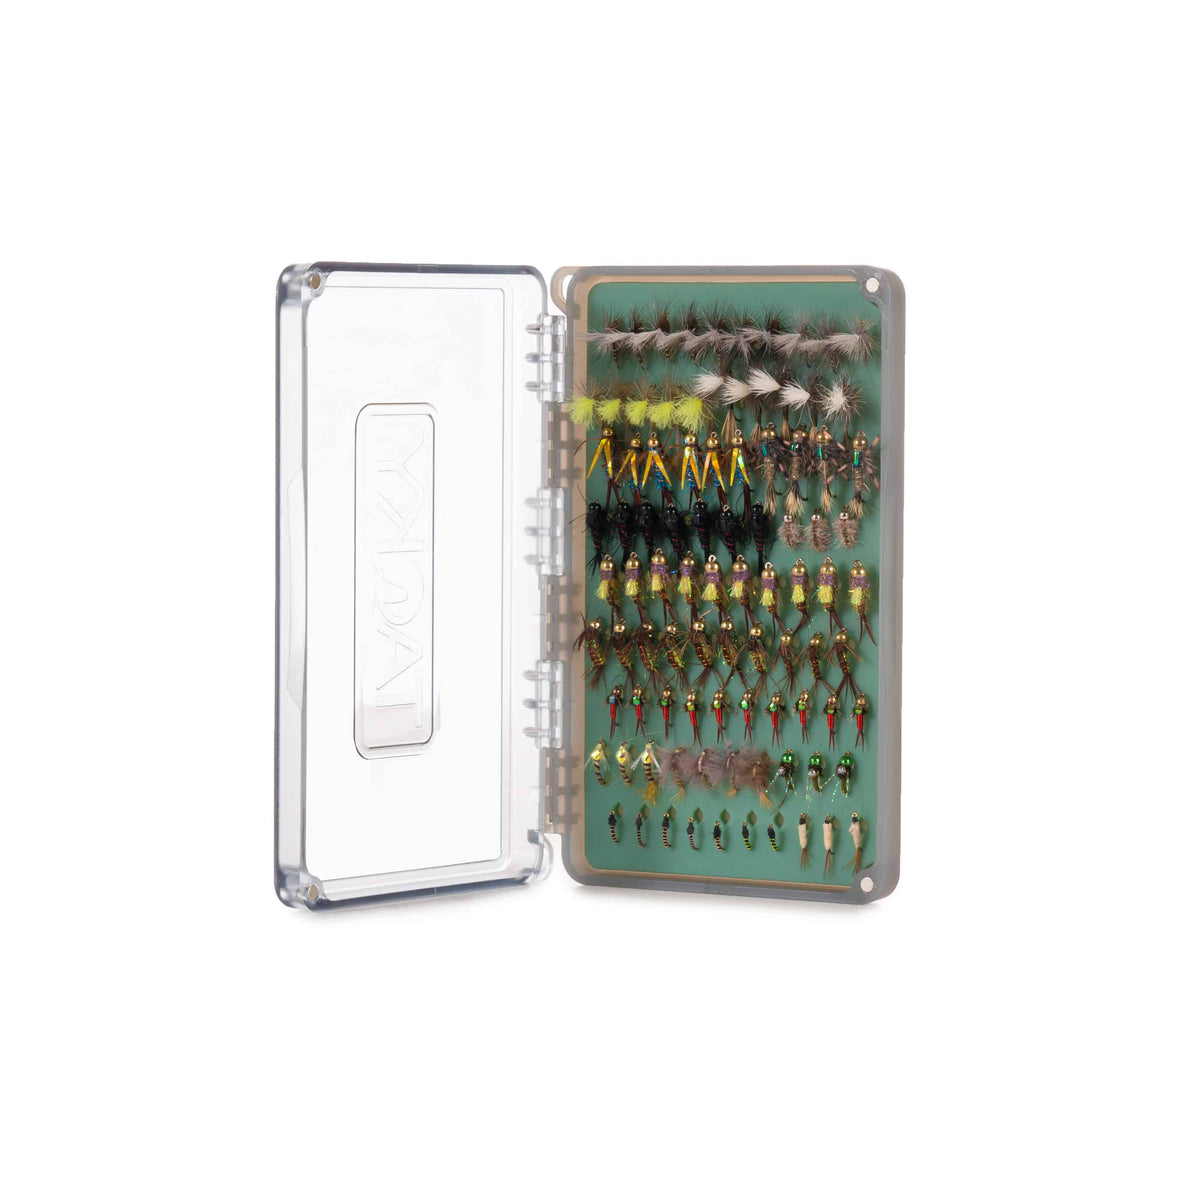 Tacky Day Pack Fly Box Single Sided Fly Box With Silicone Storage Slits Open Loaded With Flies Wide Open